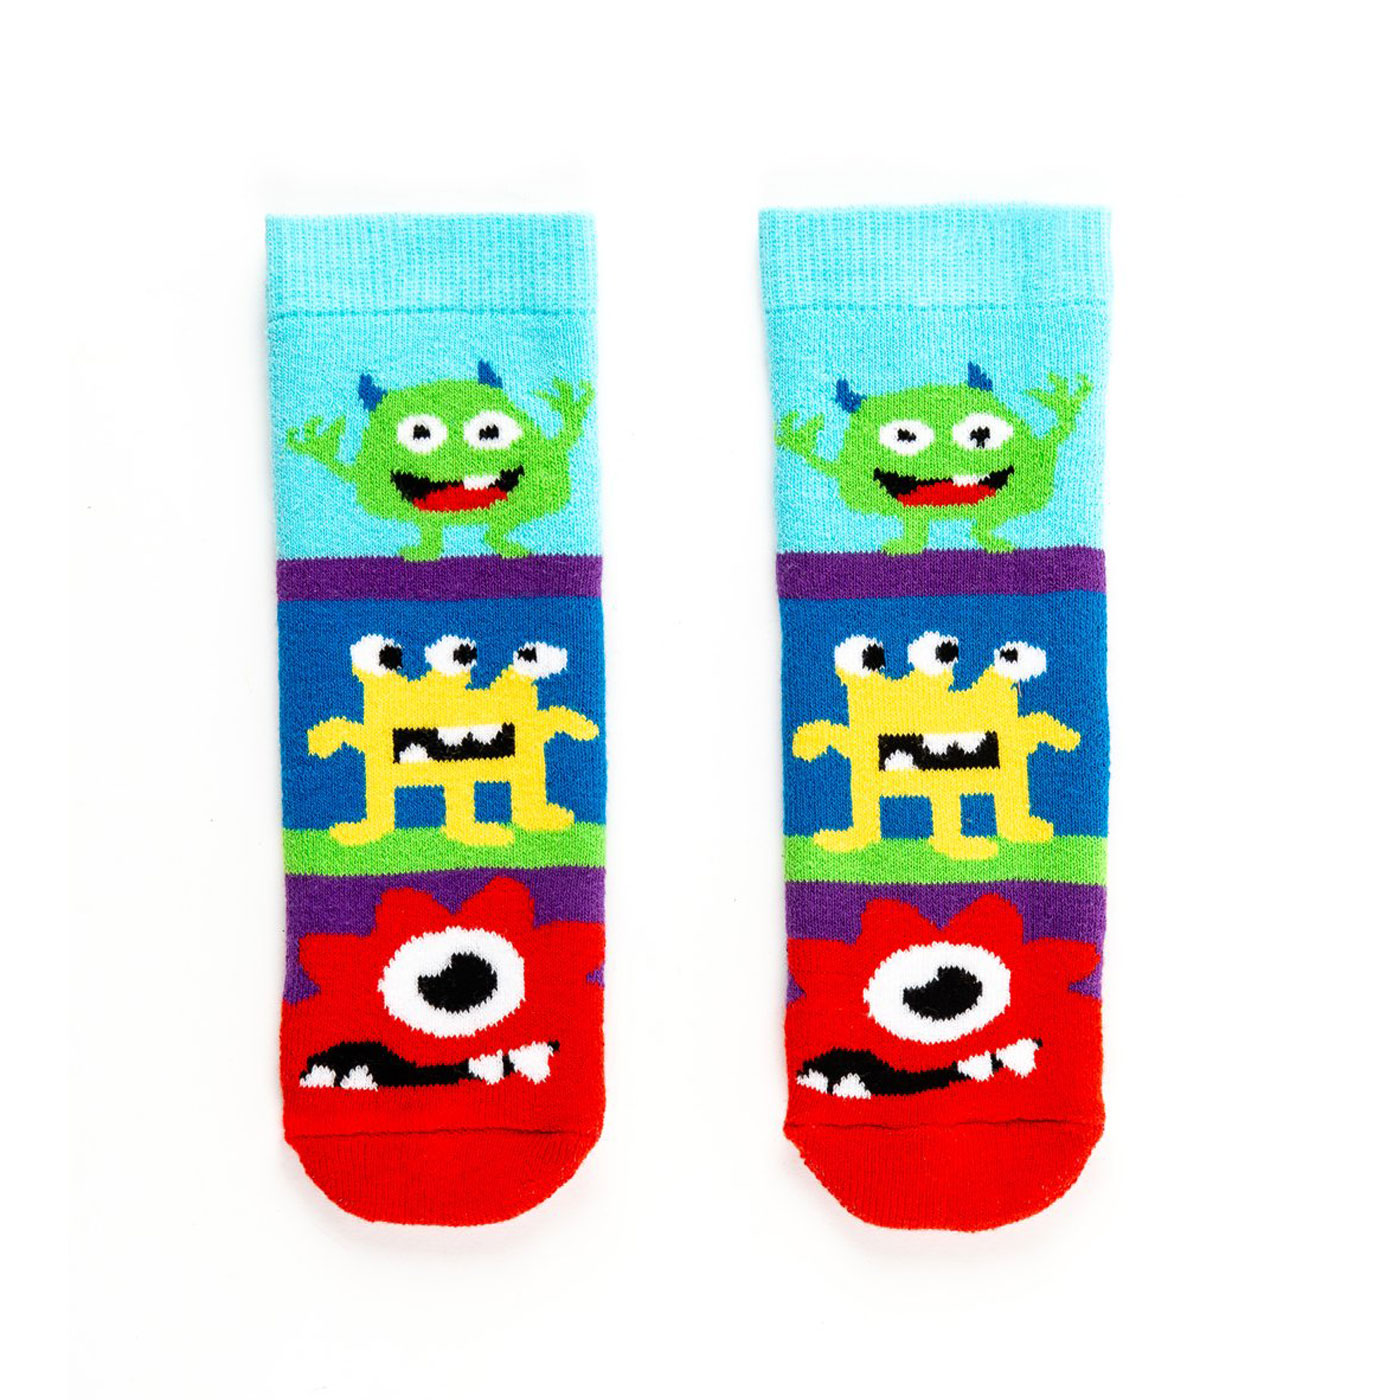 A pair of tots socks by Squelch, style Monsters, in blue and red multi. Front view.